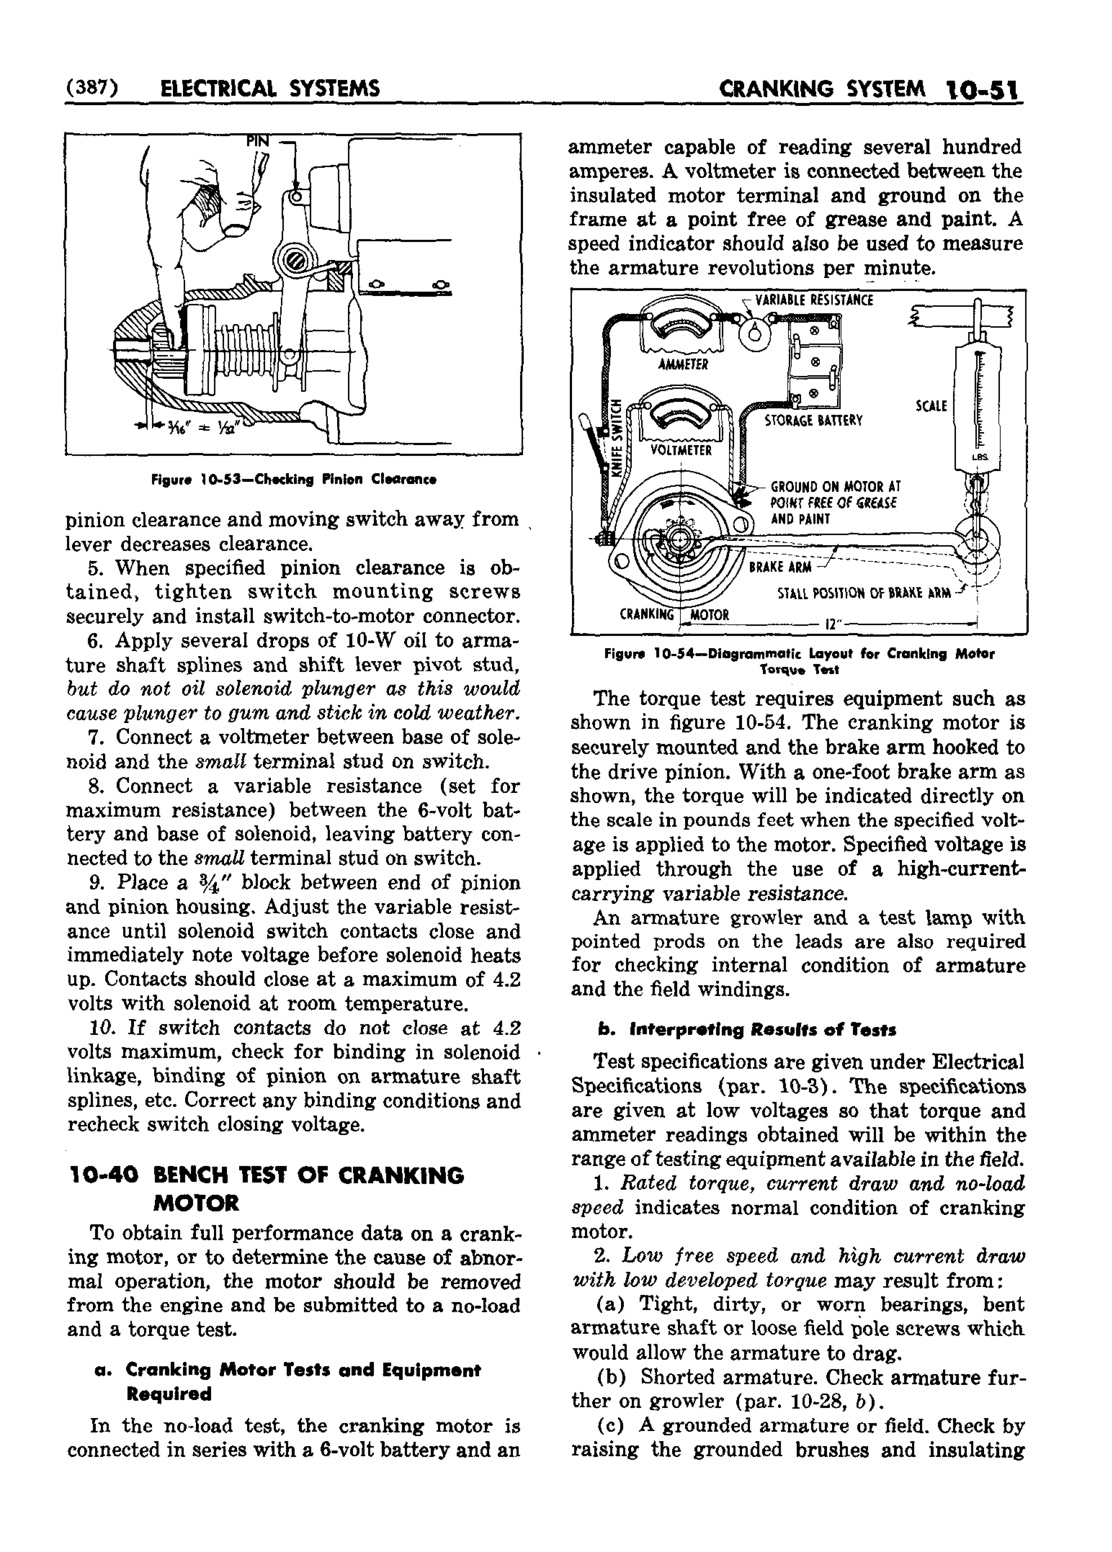 n_11 1952 Buick Shop Manual - Electrical Systems-051-051.jpg